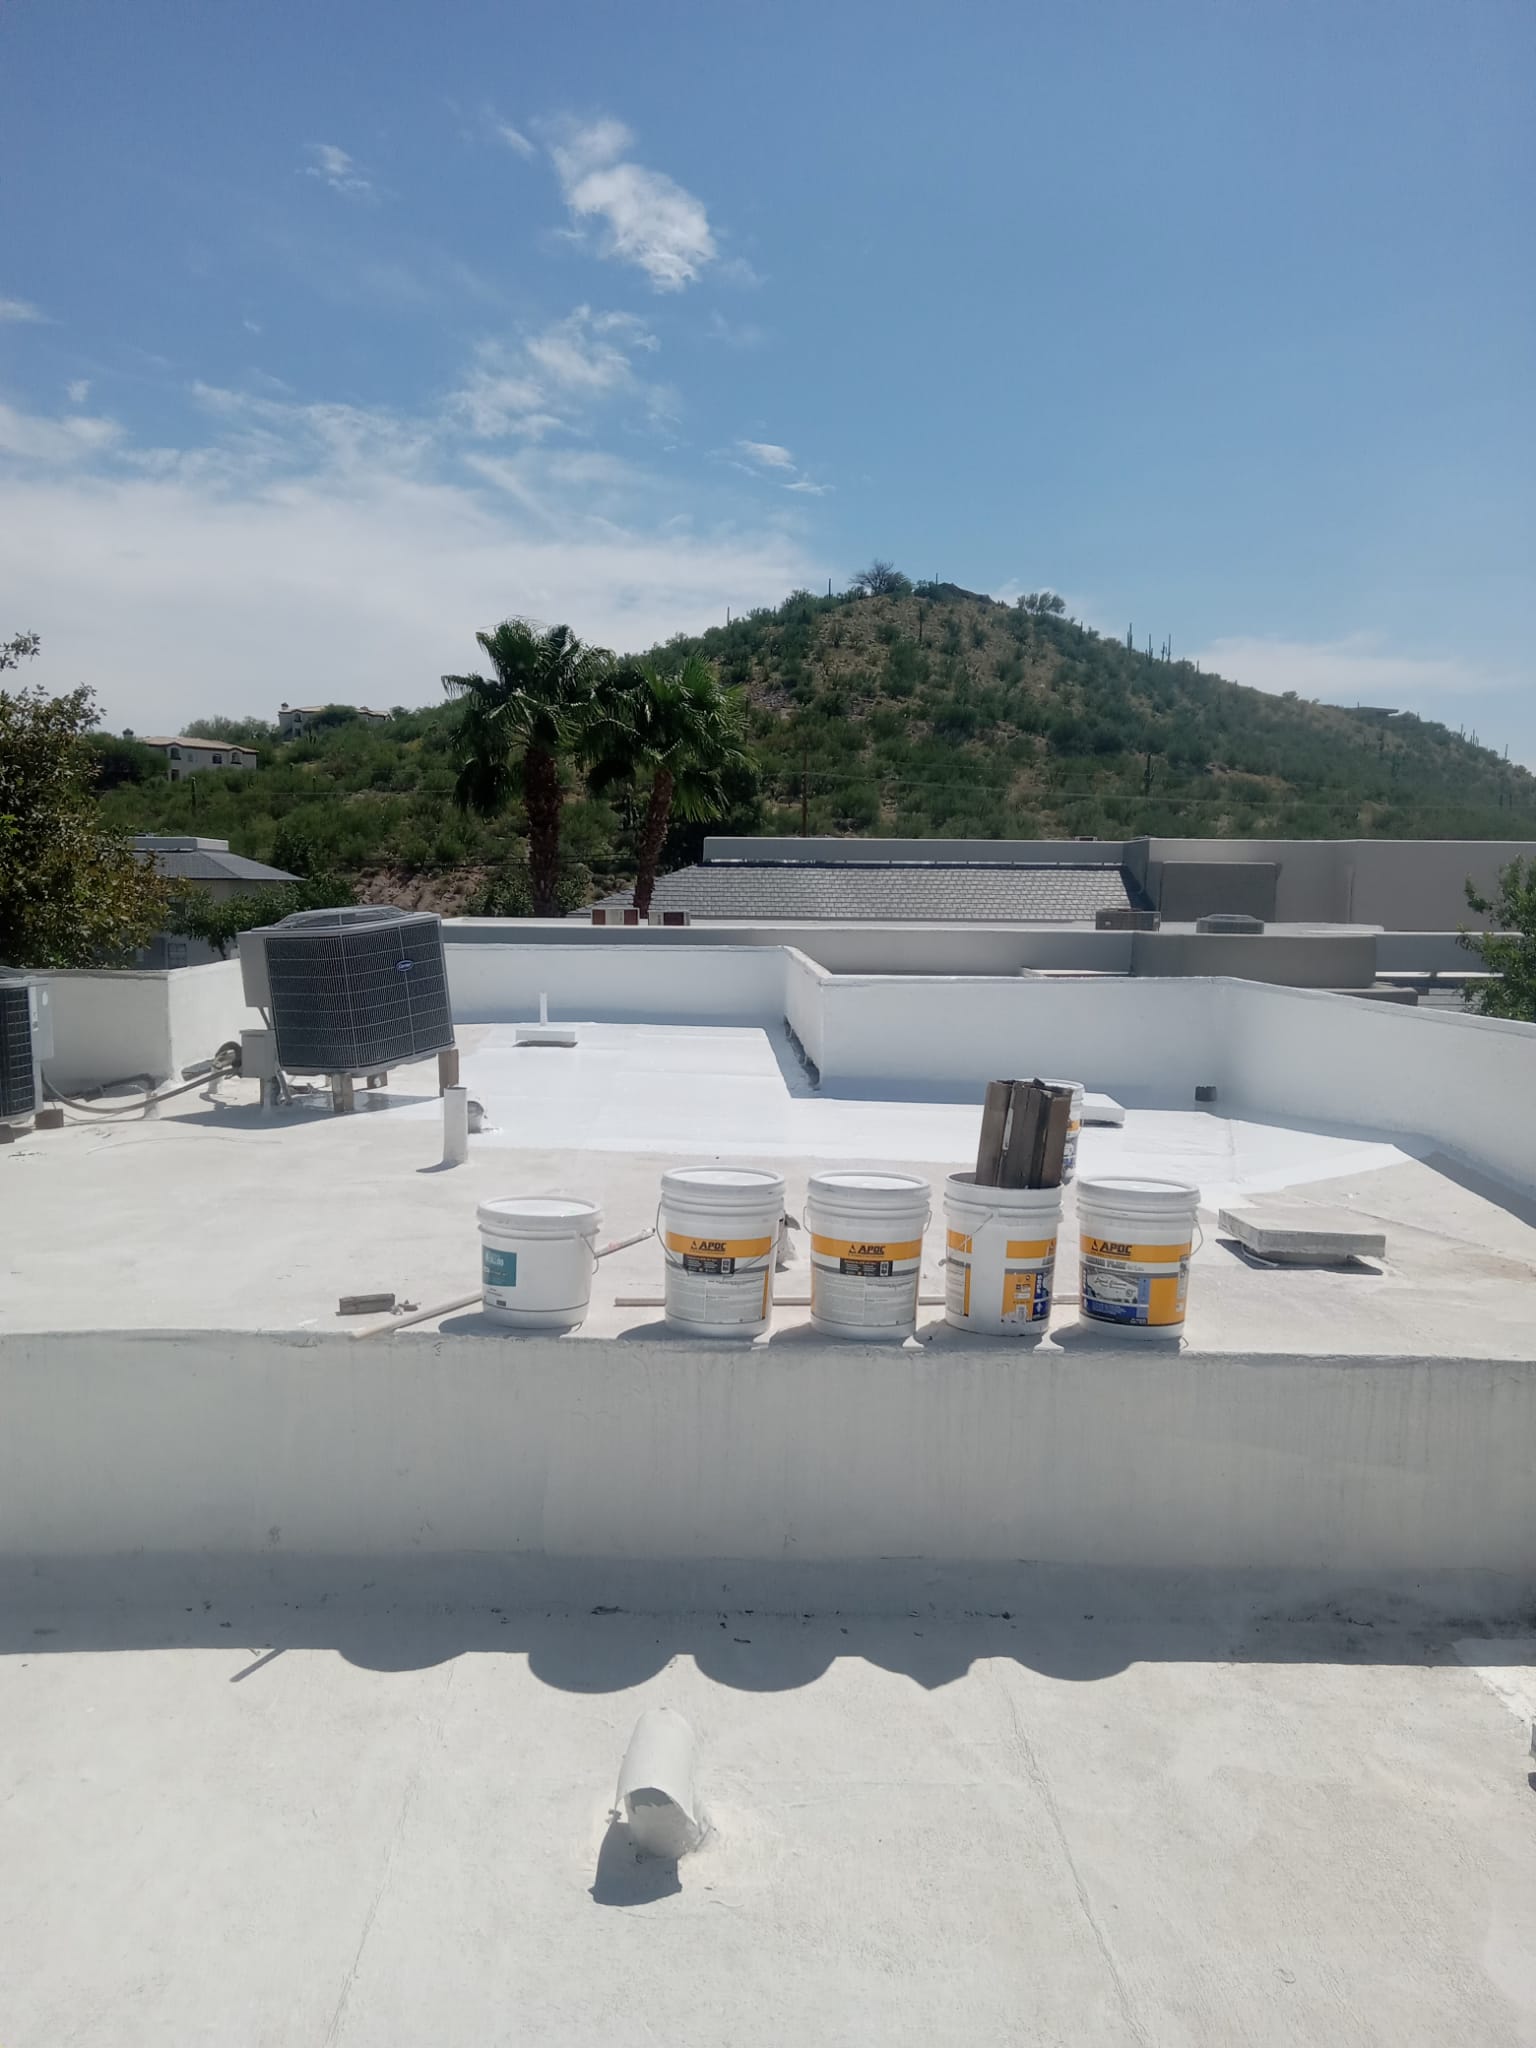 Carefree roof showcasing areas with completed and pending coating.